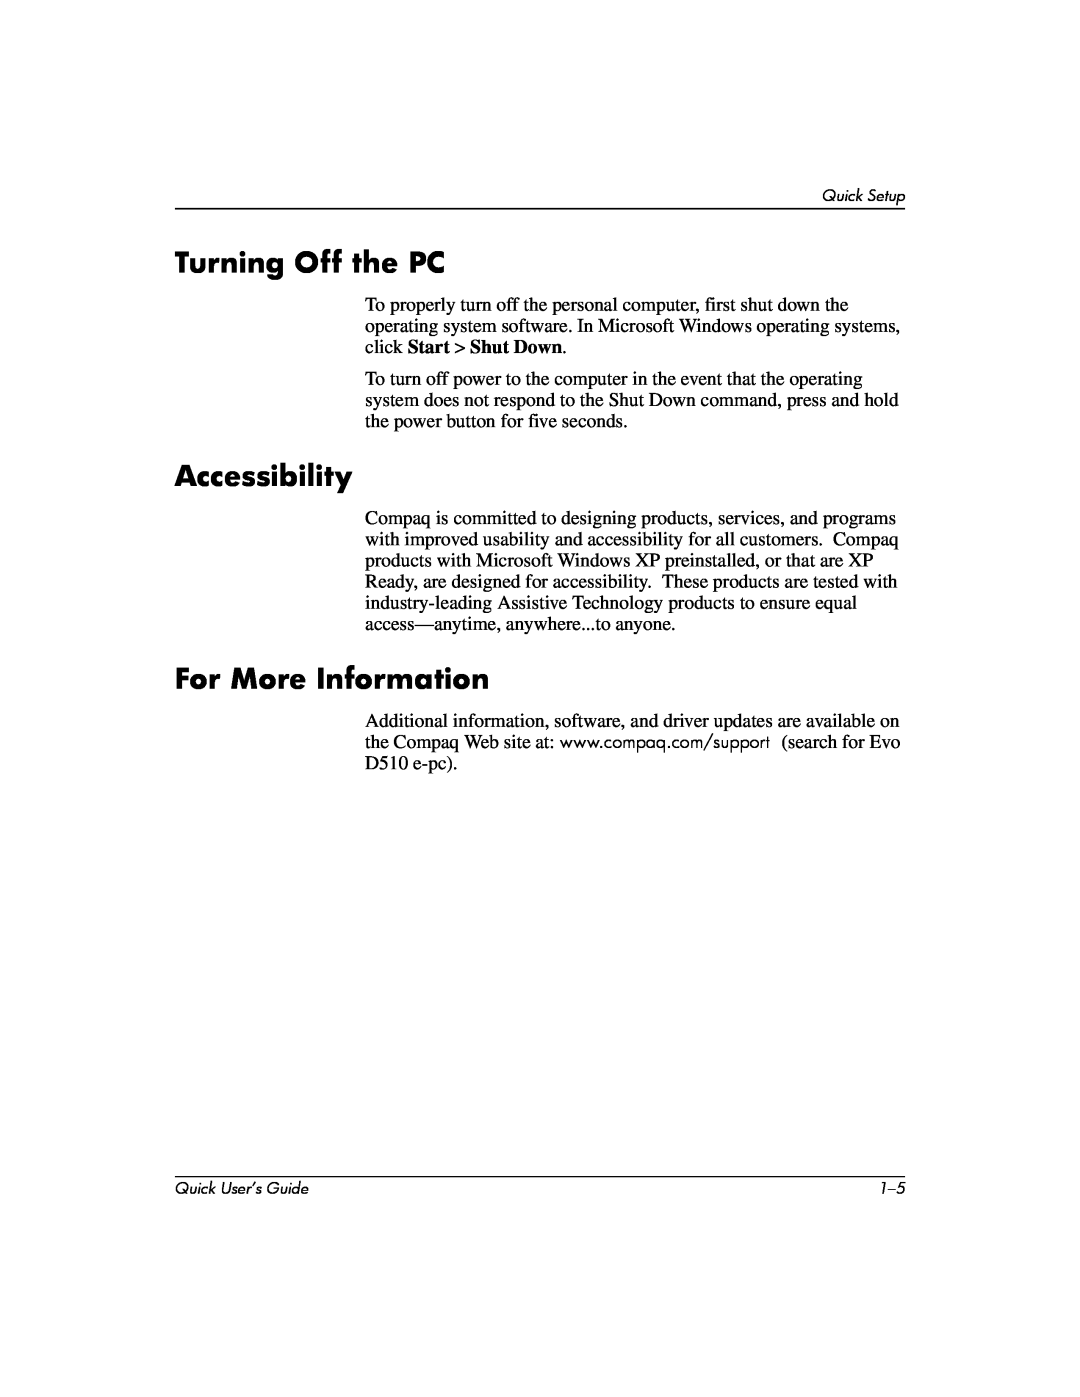 Compaq D510 e-pc manual Turning Off the PC, Accessibility, For More Information 